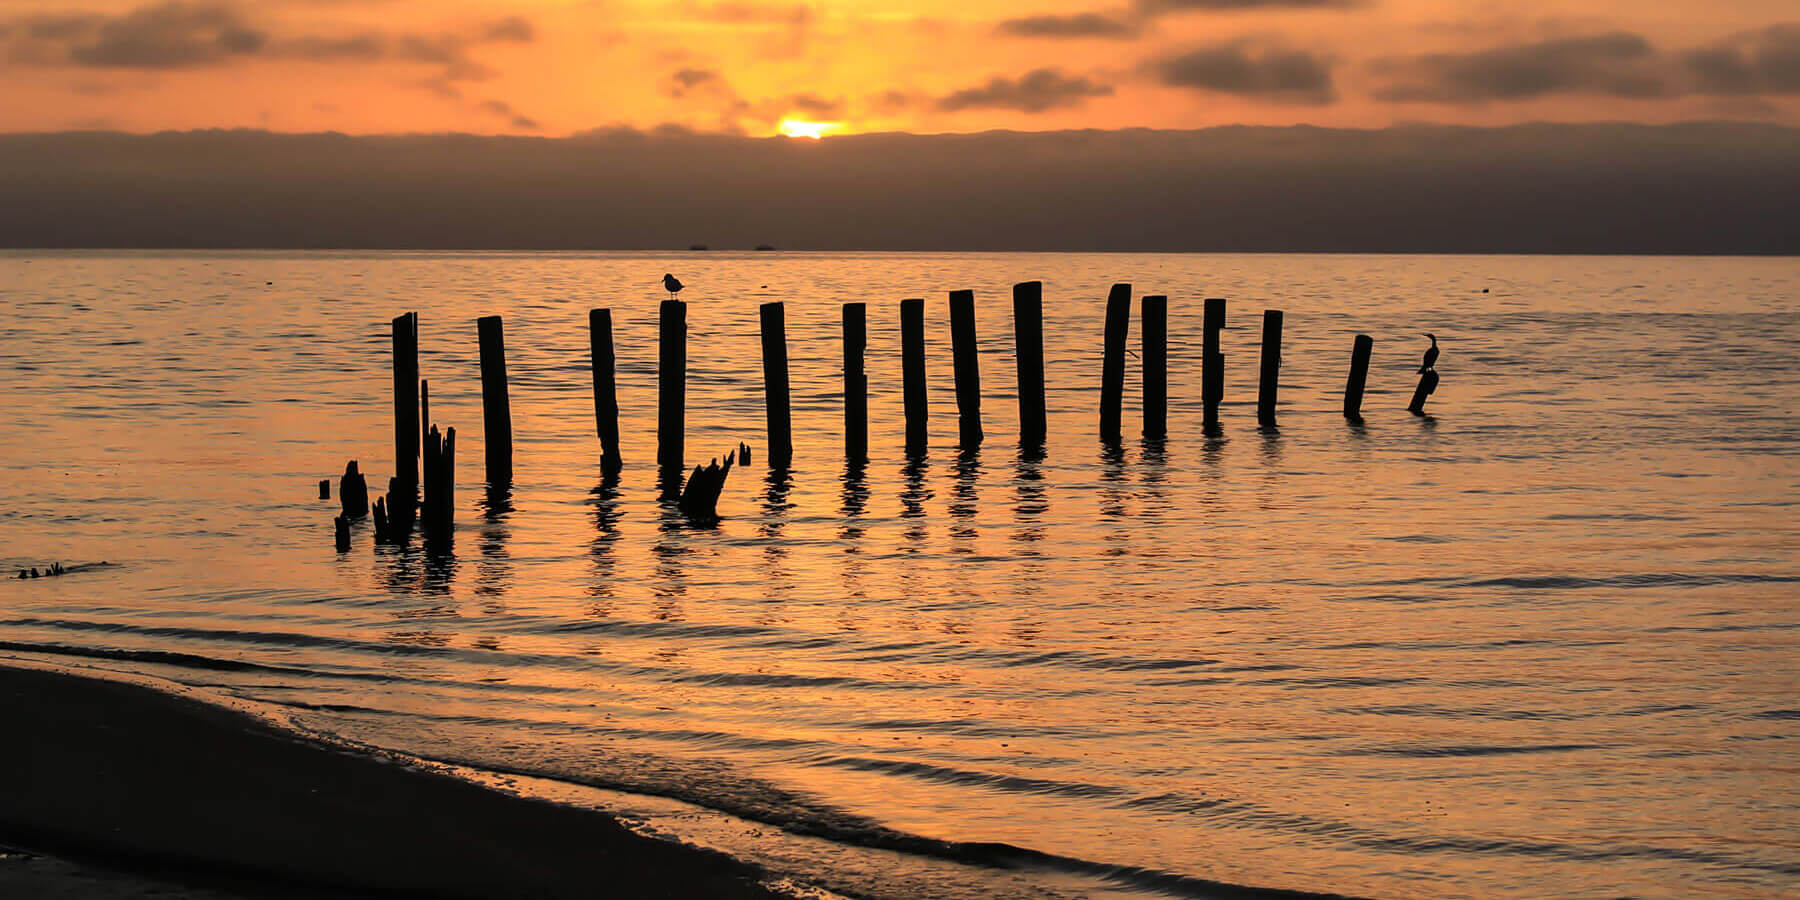 Picture of pilings in the water at sunset